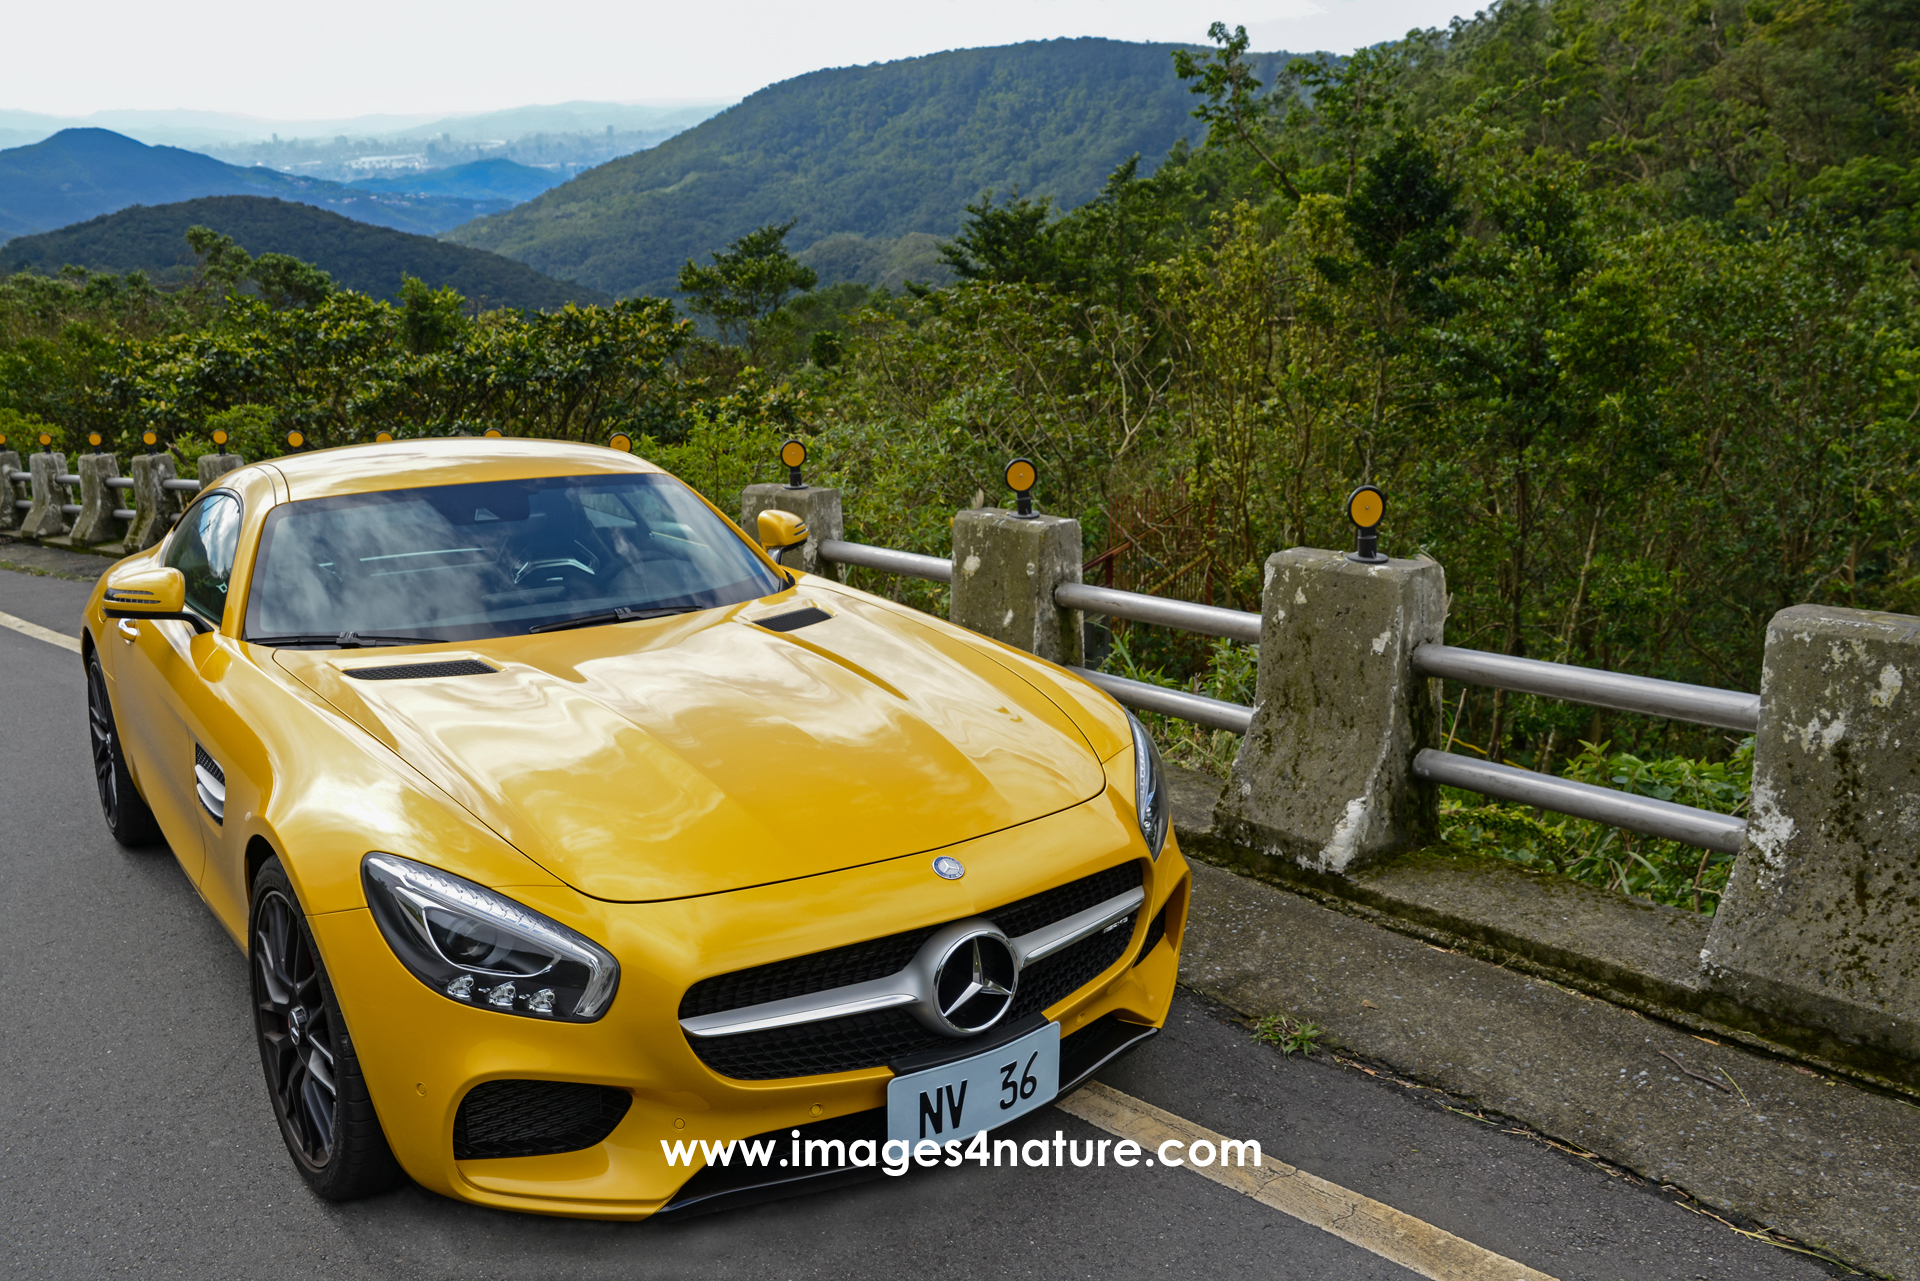 Right front view of Mercedes AMG GT Coupe on mountain road